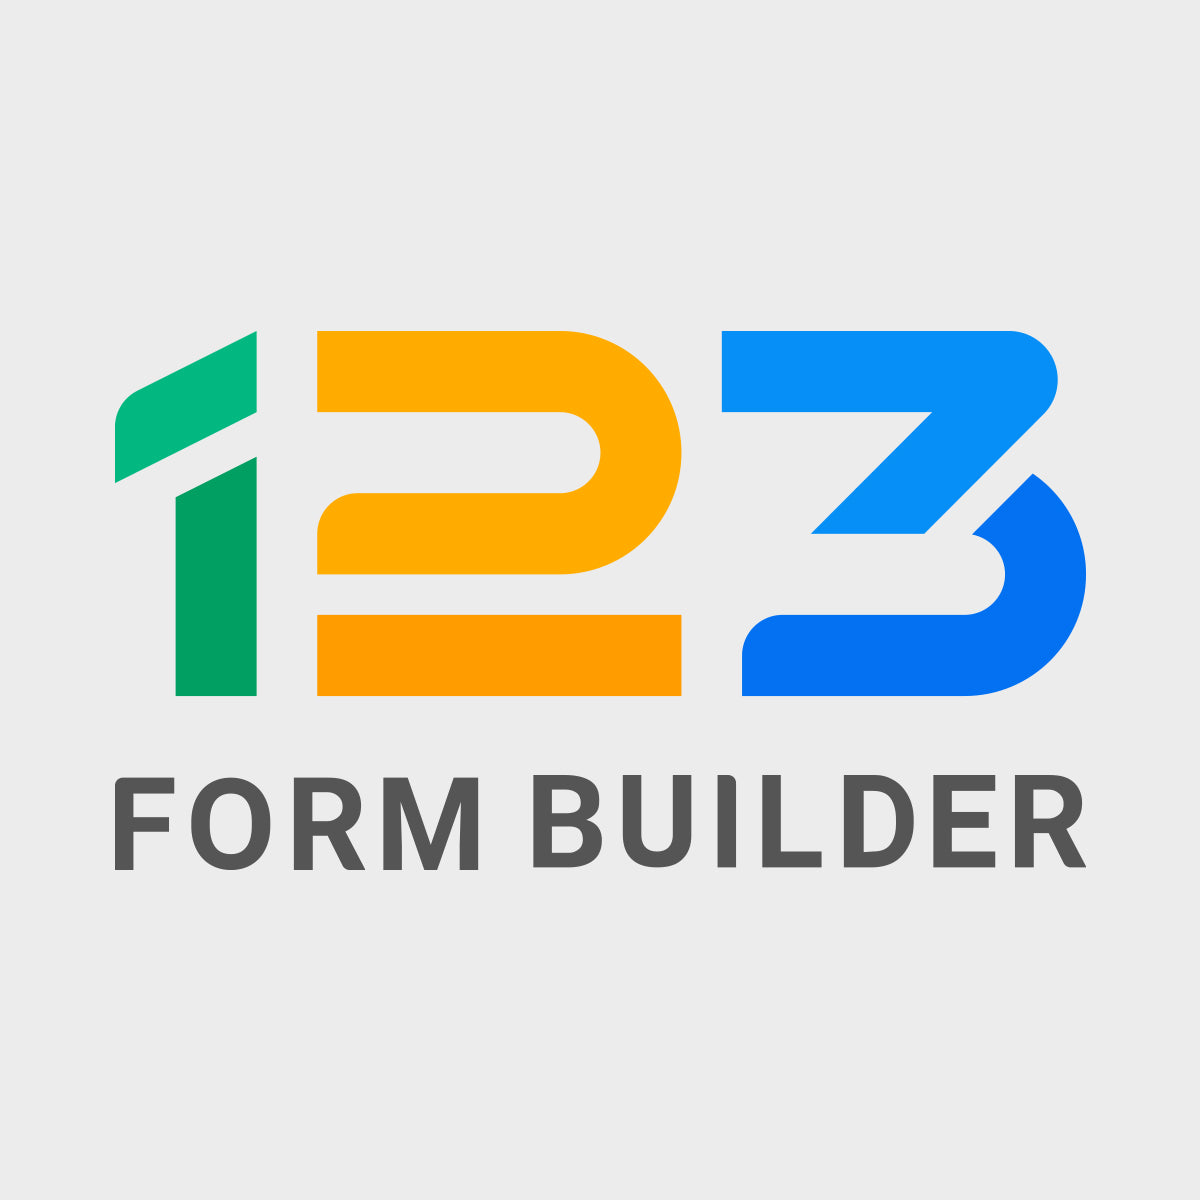 Hire Shopify Experts to integrate 123 Form Builder app into a Shopify store